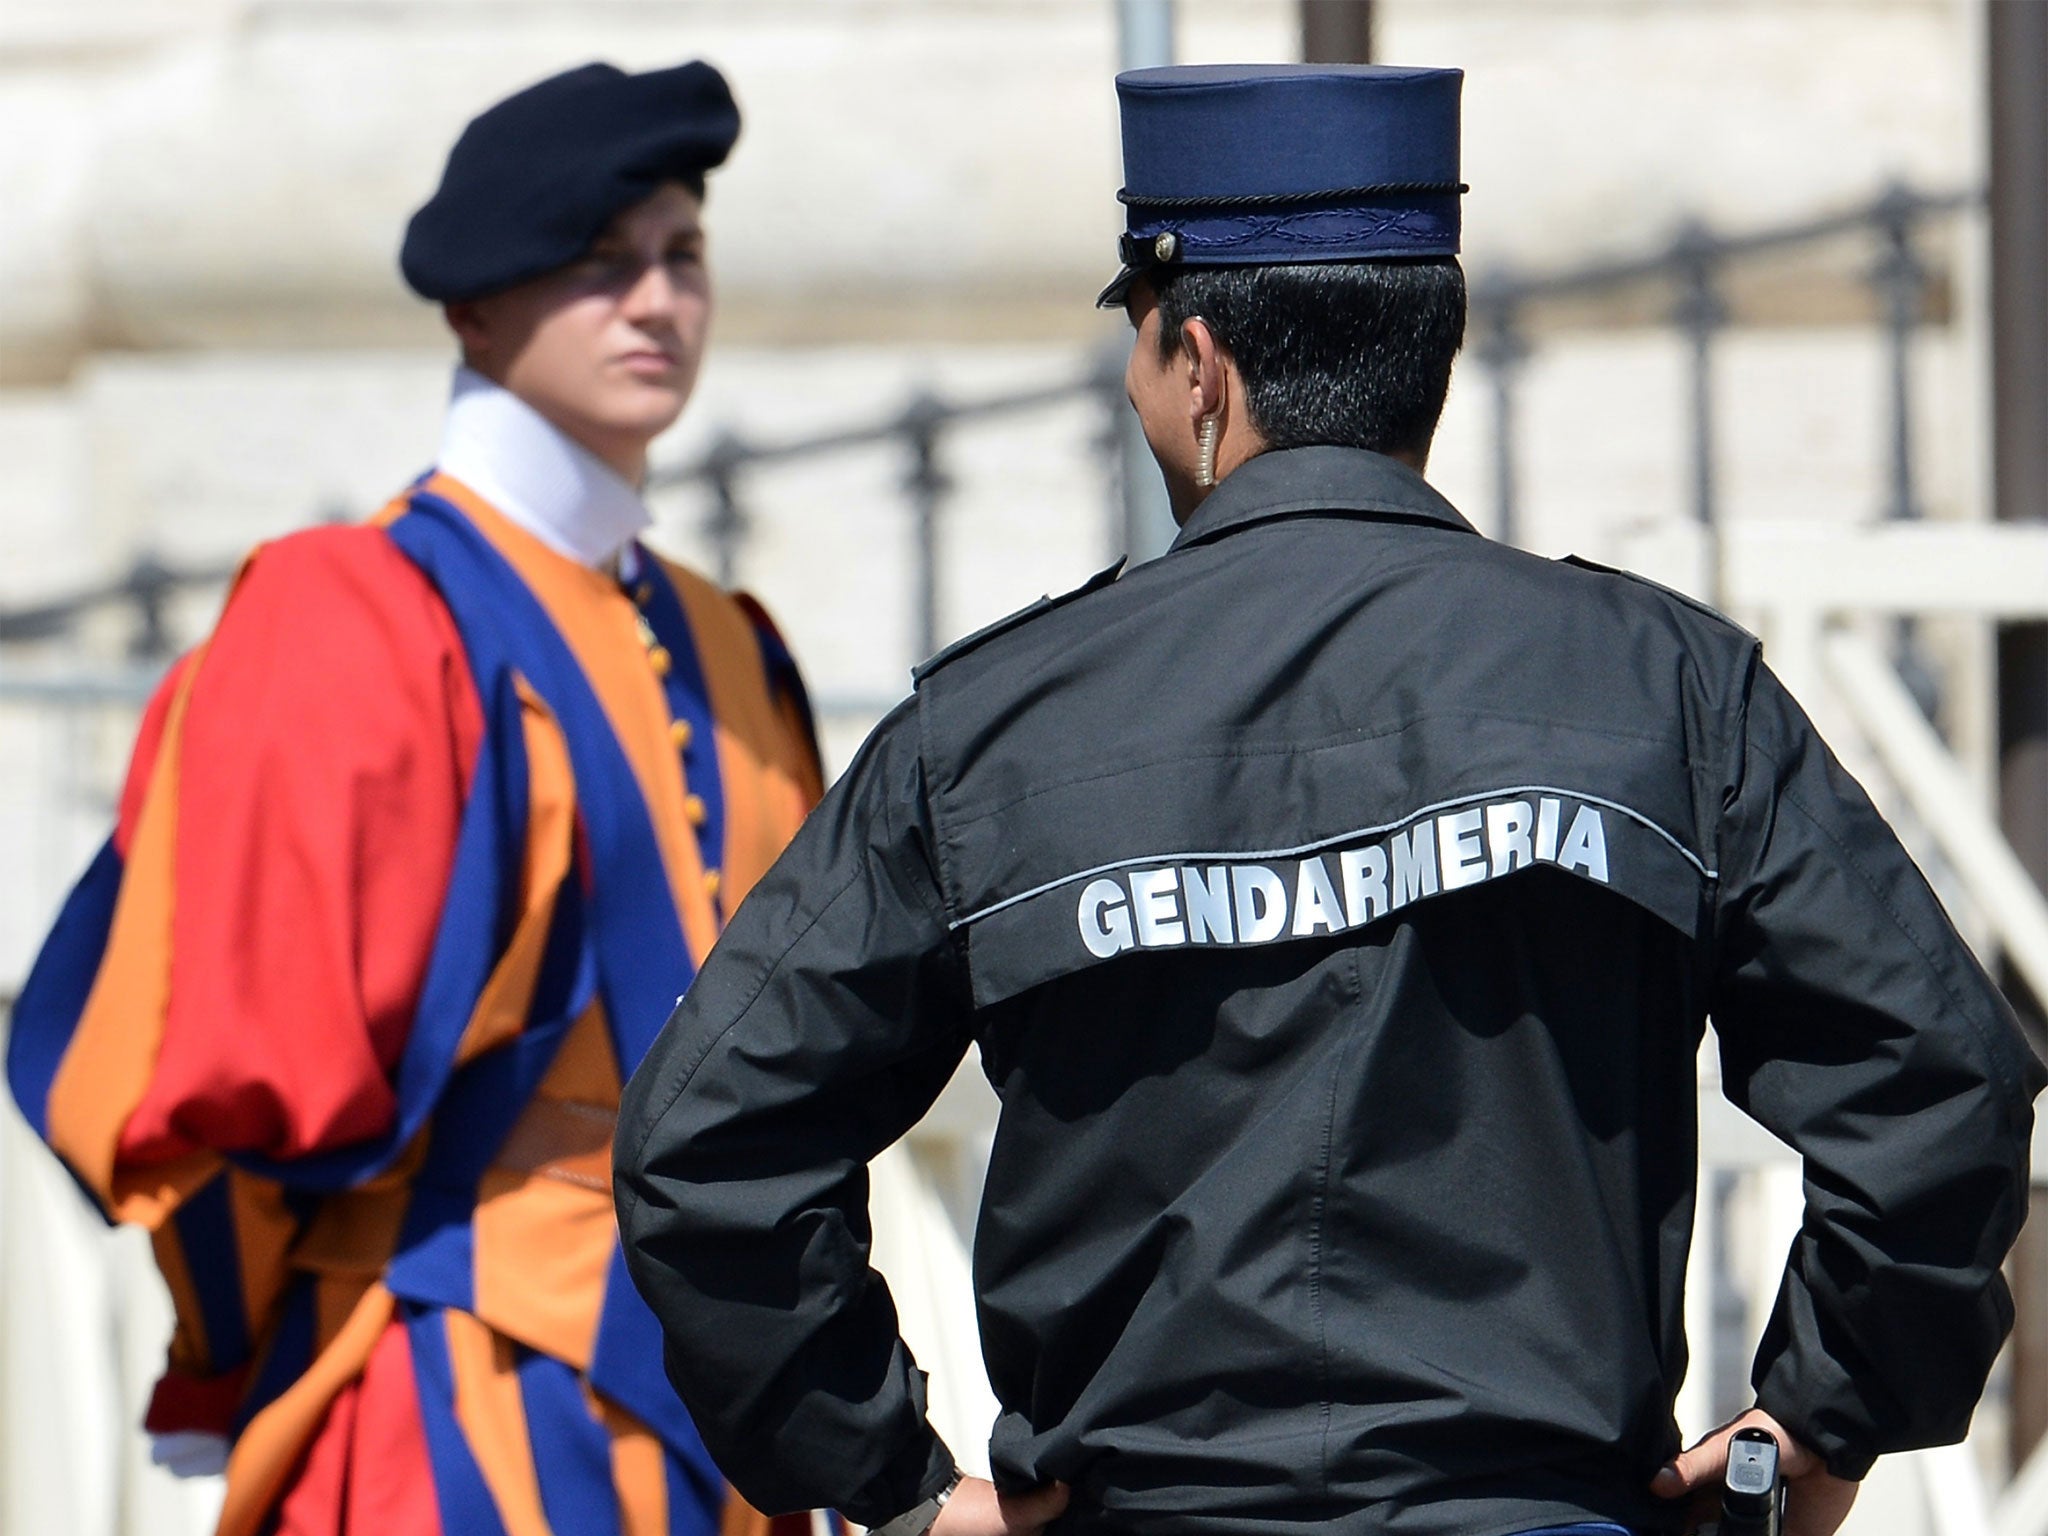 A Vatican's gendarme, right, with a member of the Swiss Guard, one of the Pope's personal bodyguards